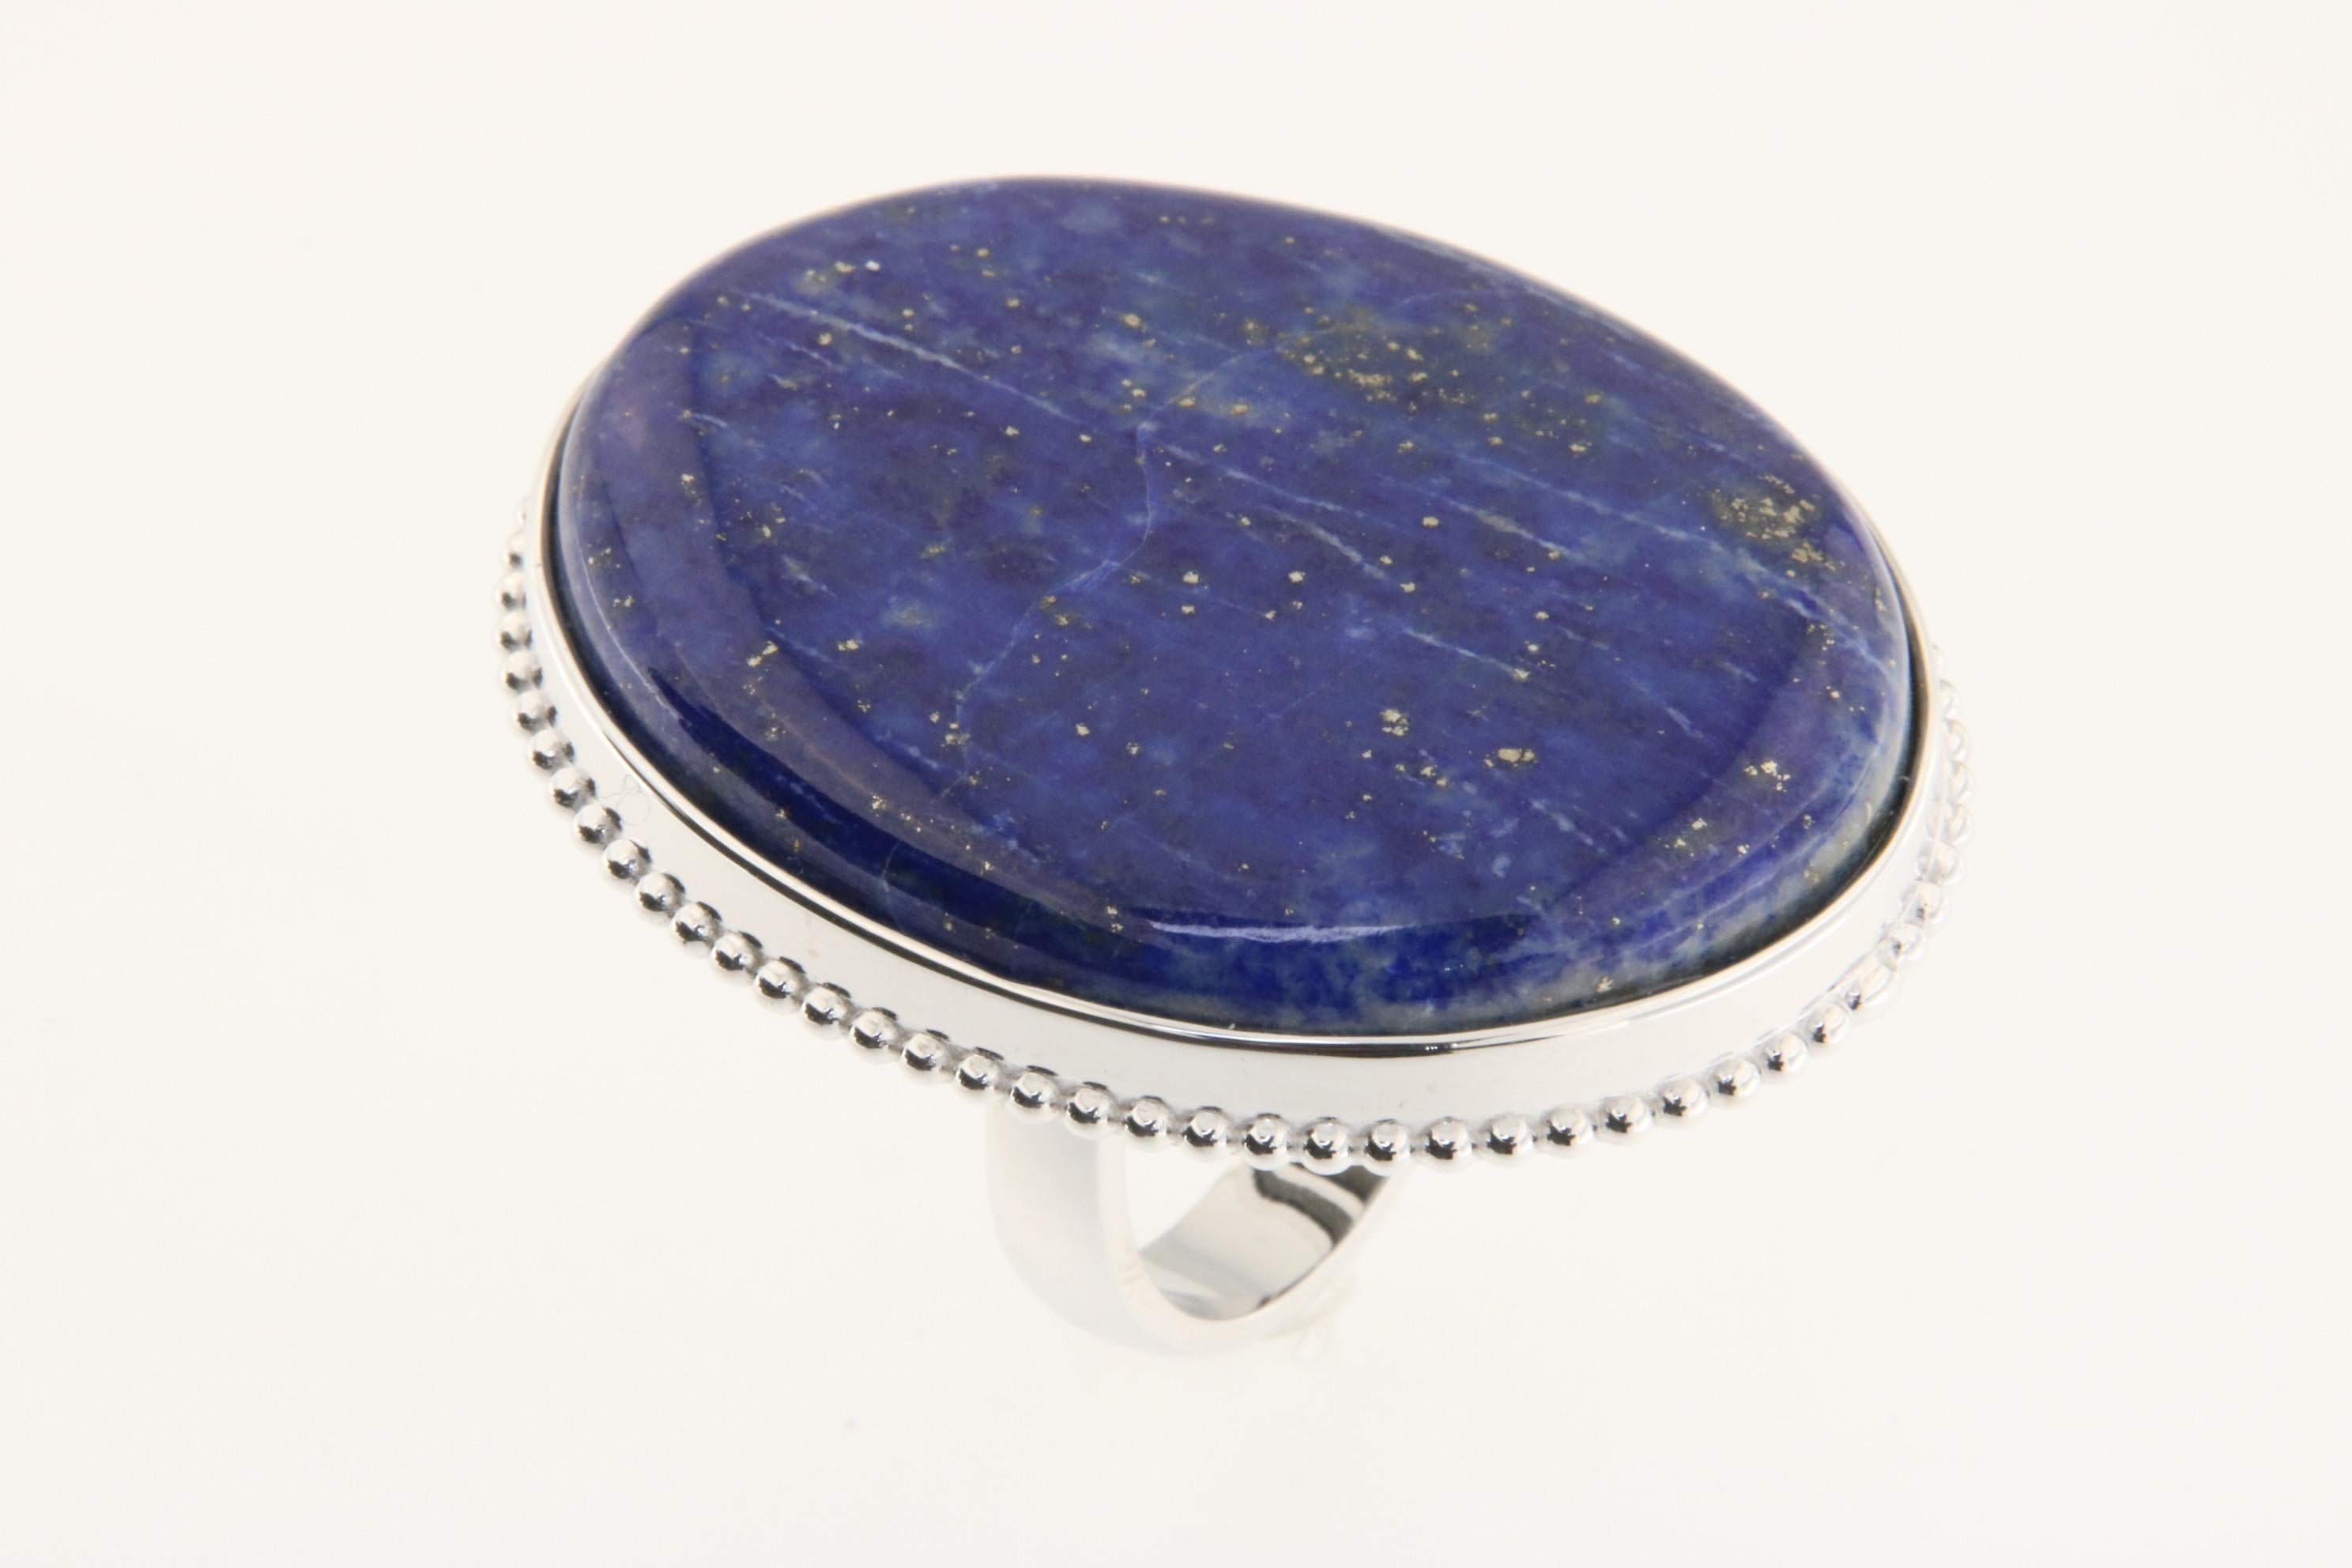 Orloff of Denmark; 73.13 carat Lapis Lazuli Ring fashioned out of 925 Sterling Silver.

This beautiful ring features a 73-carat Lapis Lazuli gemstone, prized for its deep celestial blue punctuated by natural golden flecks of pyrite. The gemstone is